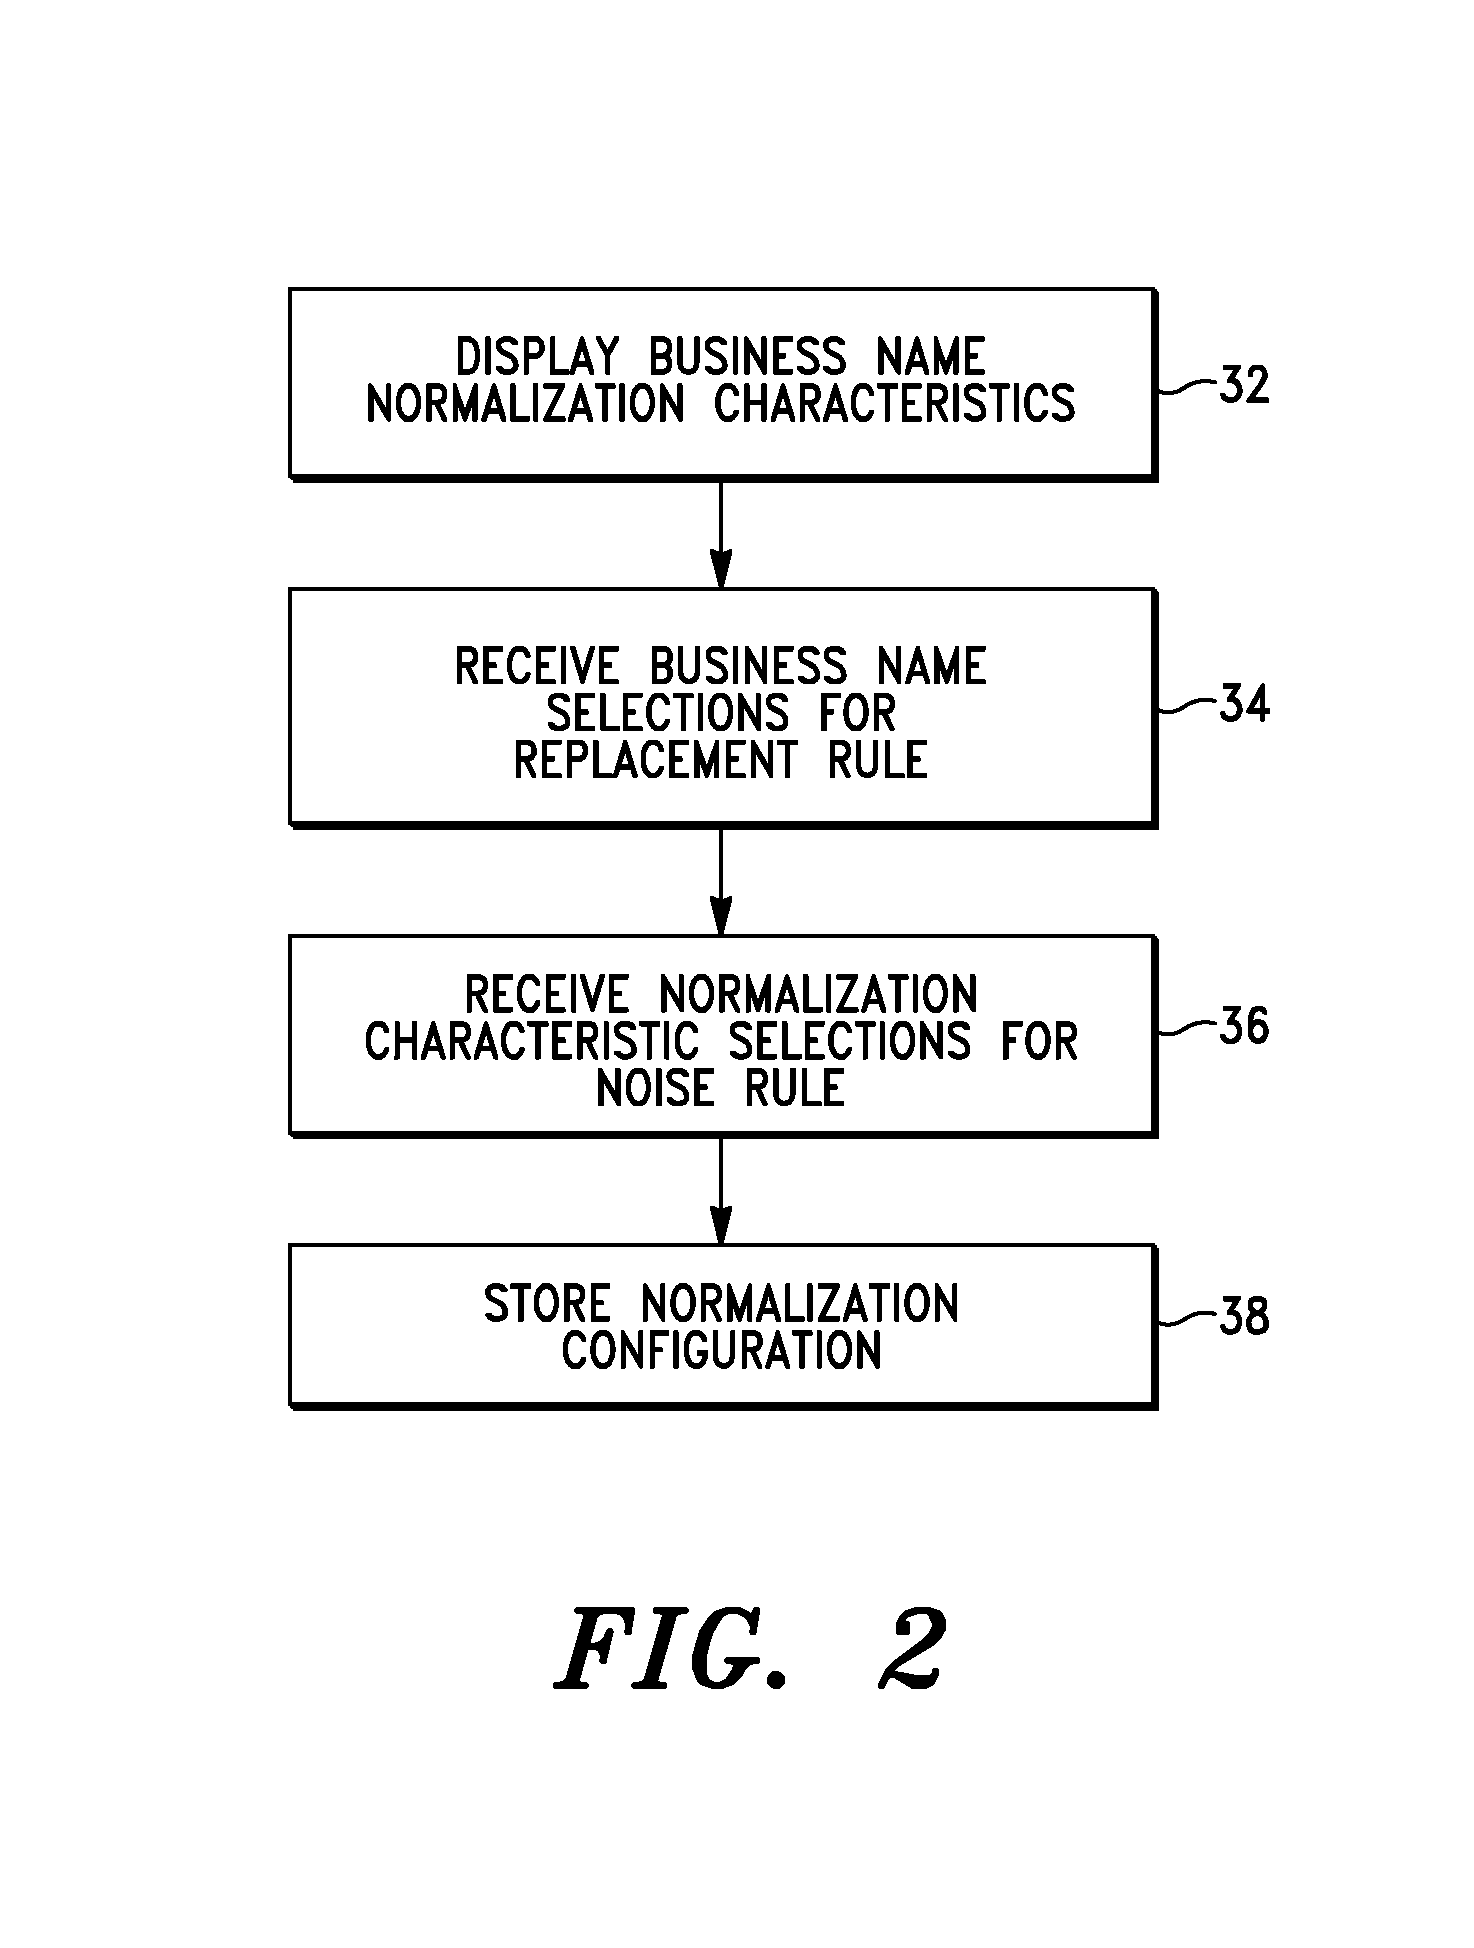 System and Method for Configuring Business Entity Search Logic